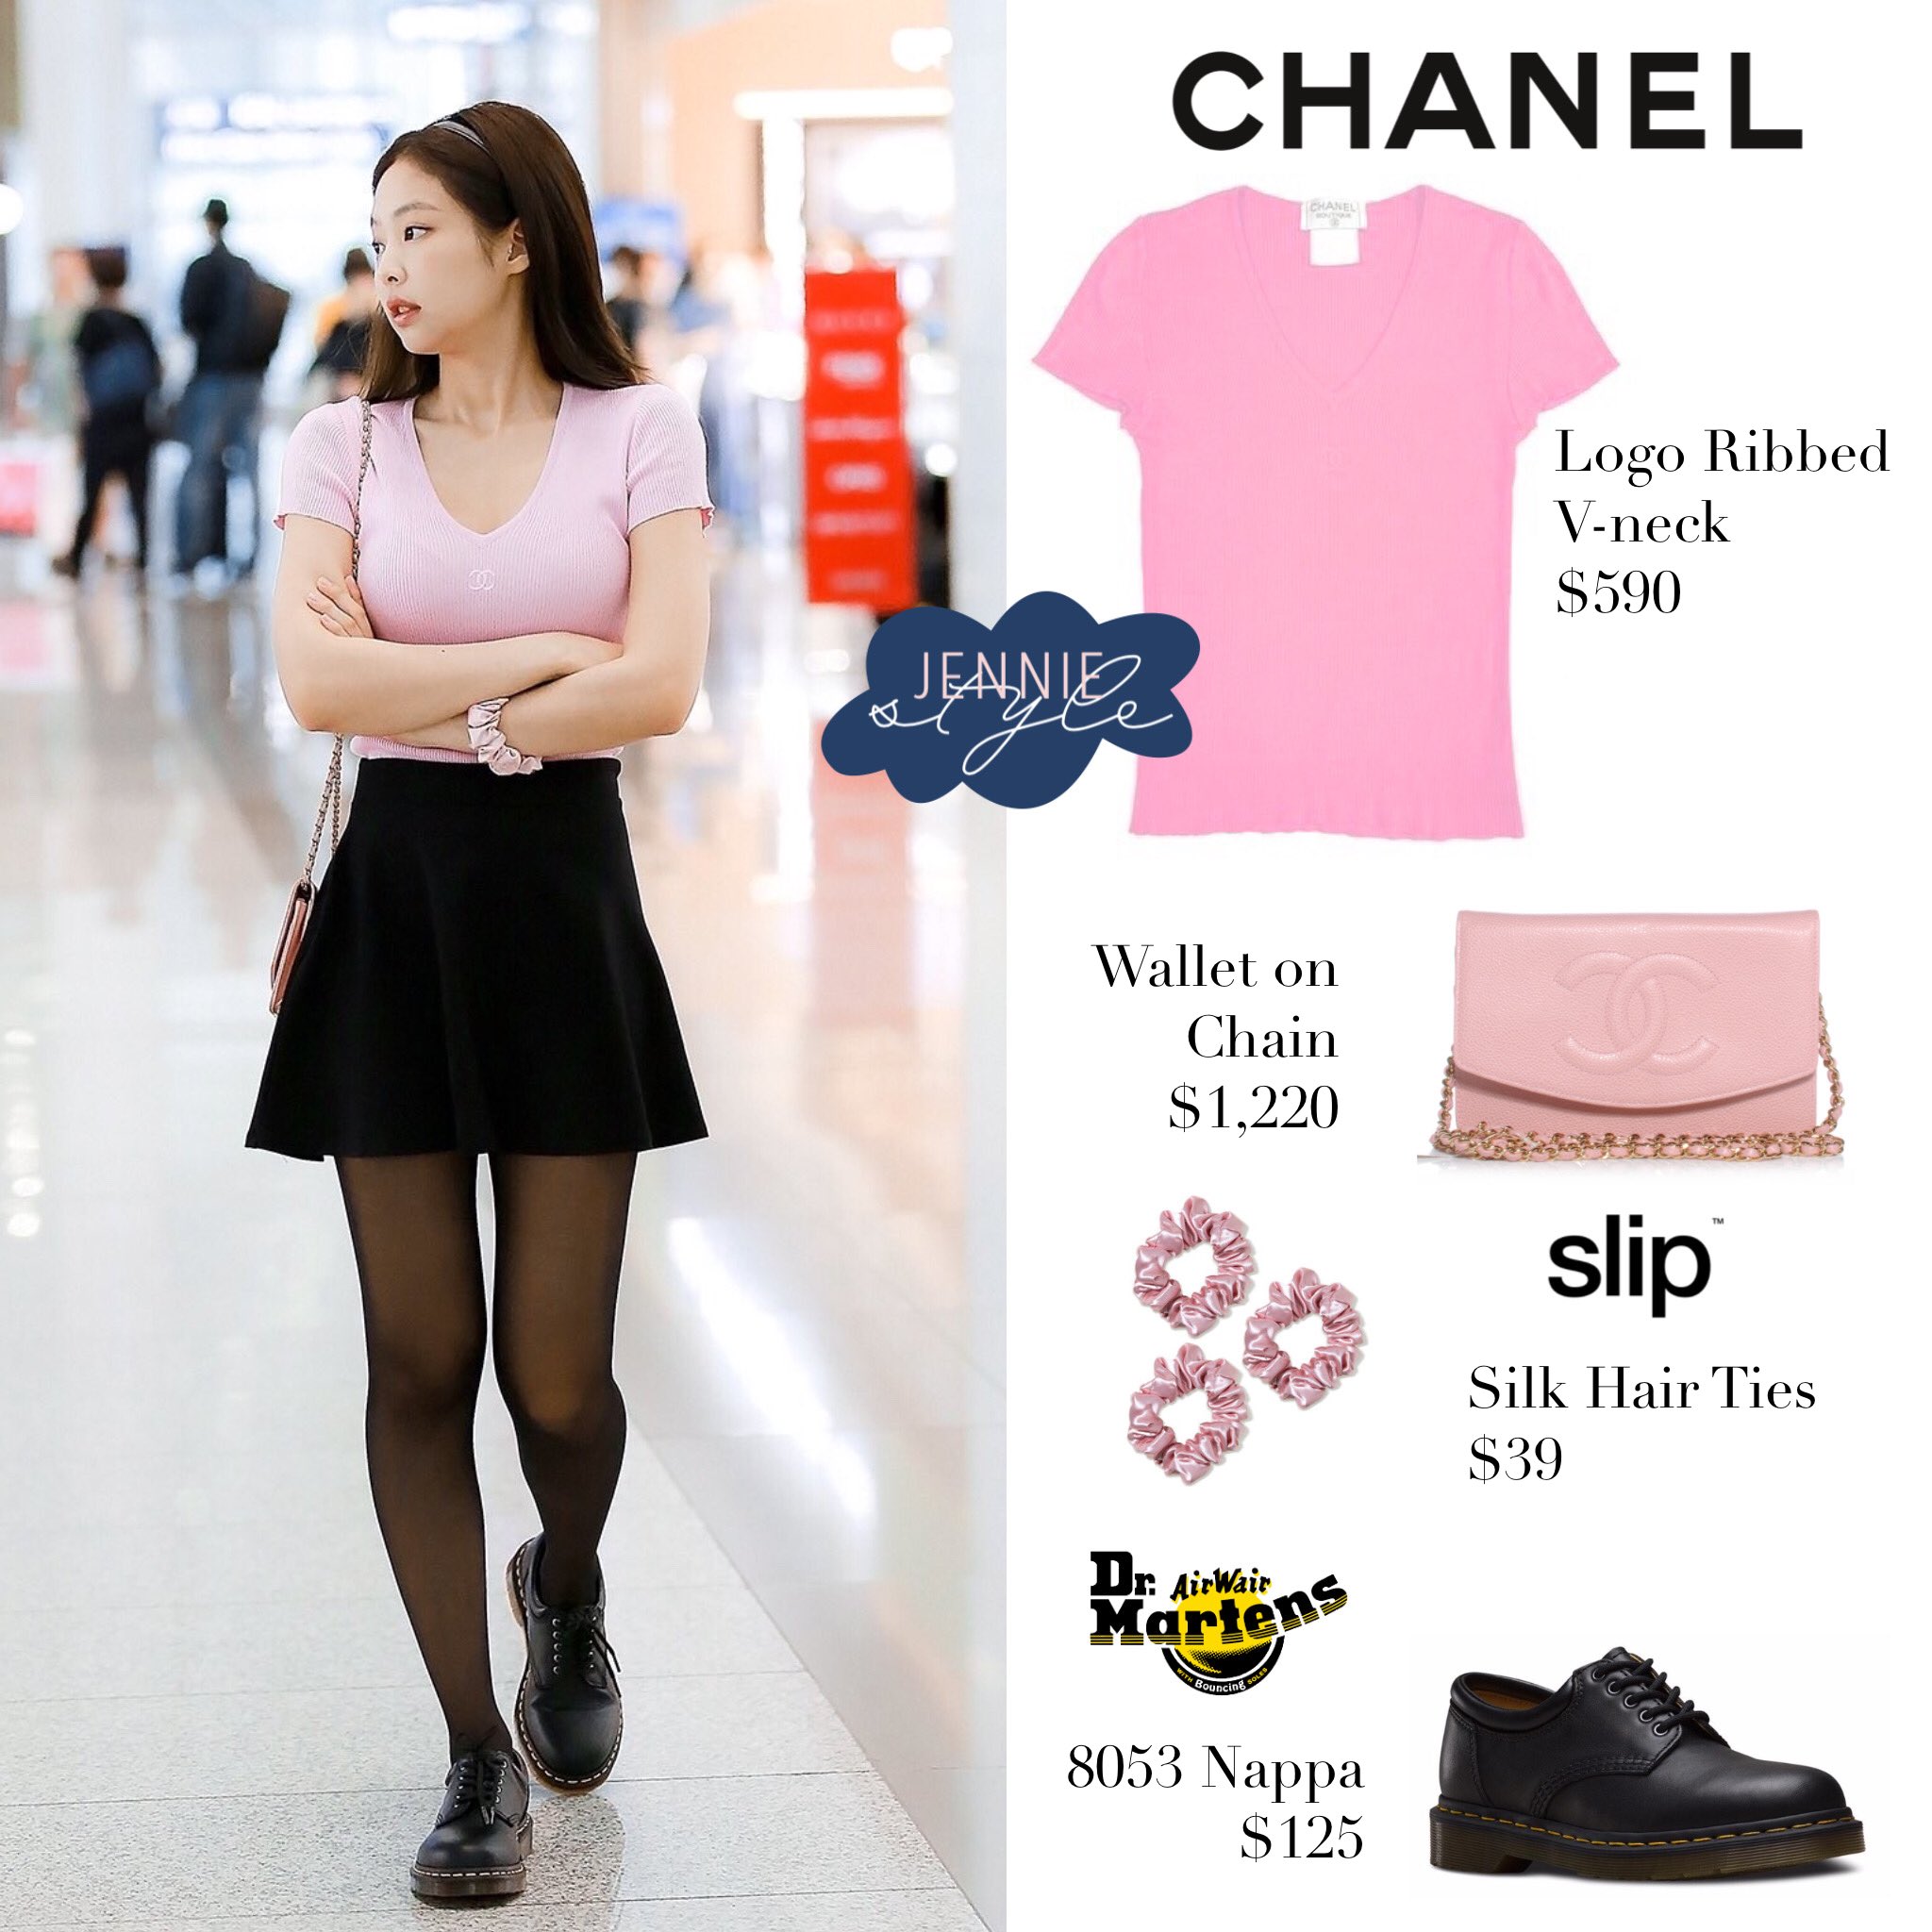 Jennie Style on X: Incheon Airport 190711 CHANEL Logo Ribbed V-neck $590,  Wallet on Chain $1,220 & Dr.Martens 8053 Nappa $125 #jennie #jenniekim # blackpink⁠ #blackpinkfashion #blackpinkstyle #jenniefashion #jenniestyle   / X